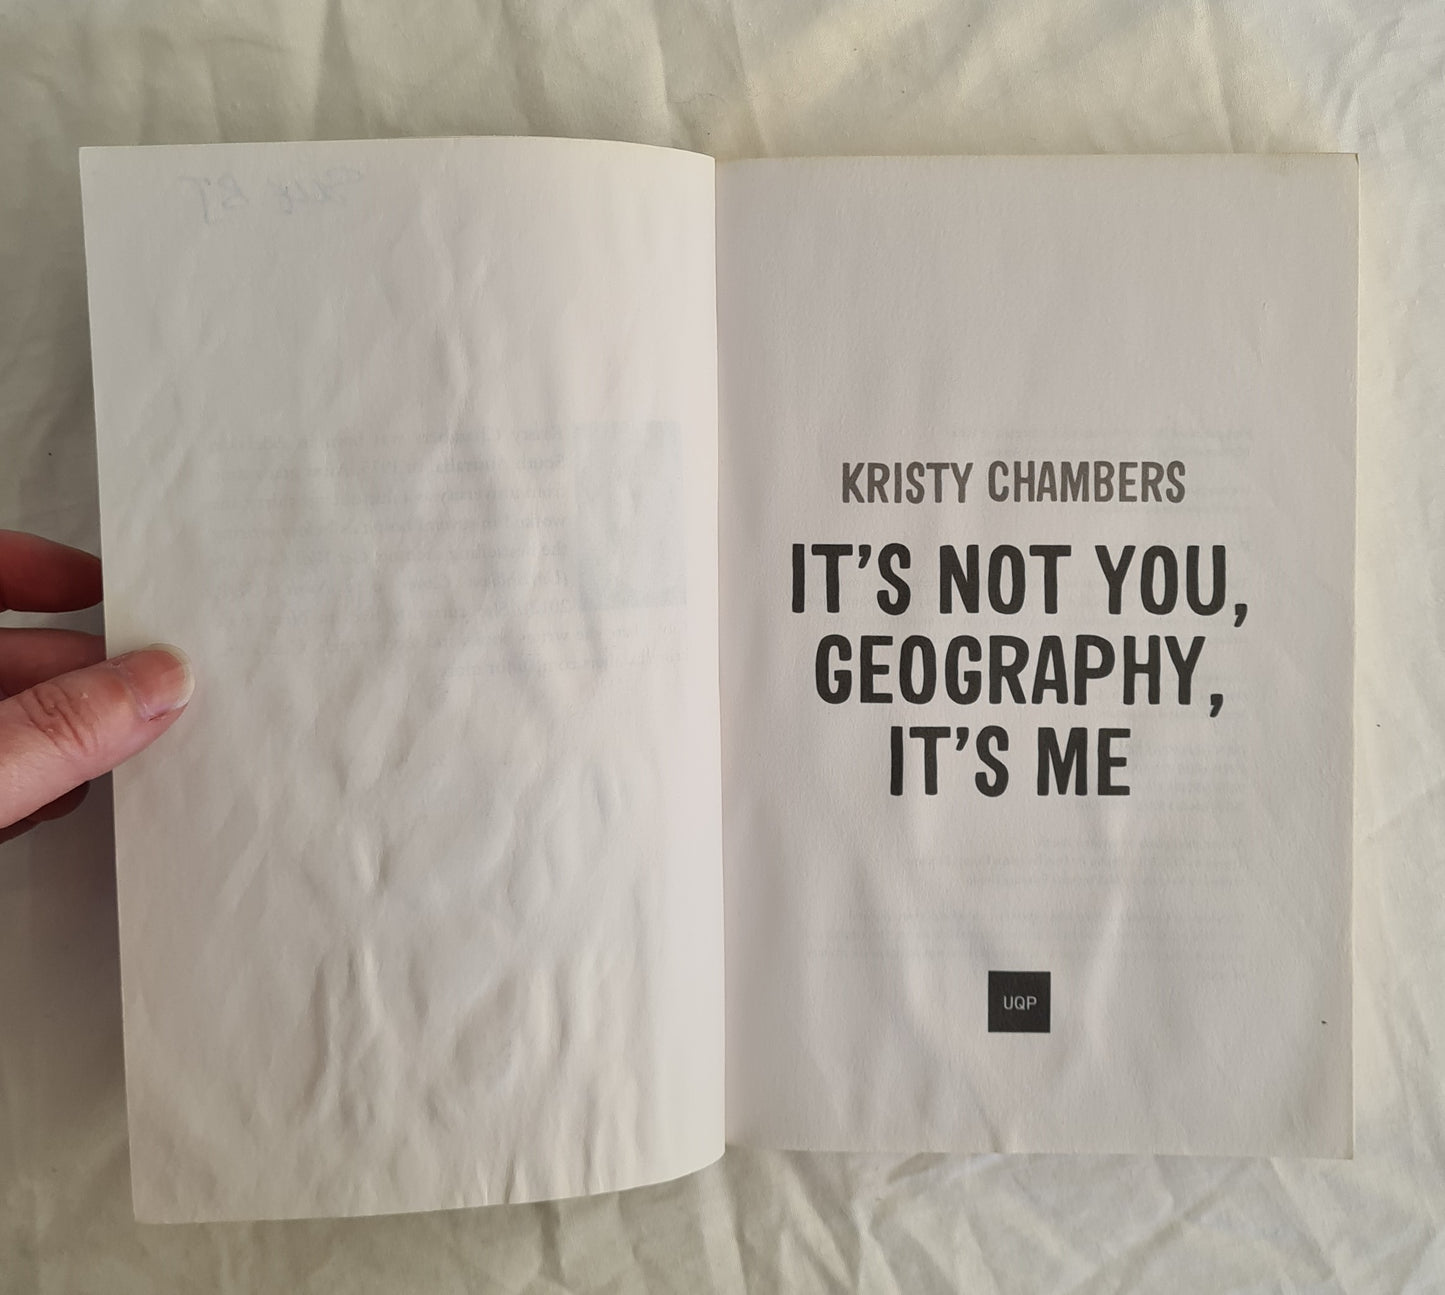 It’s Not You, Geography, It’s Me by Kirsty Chambers